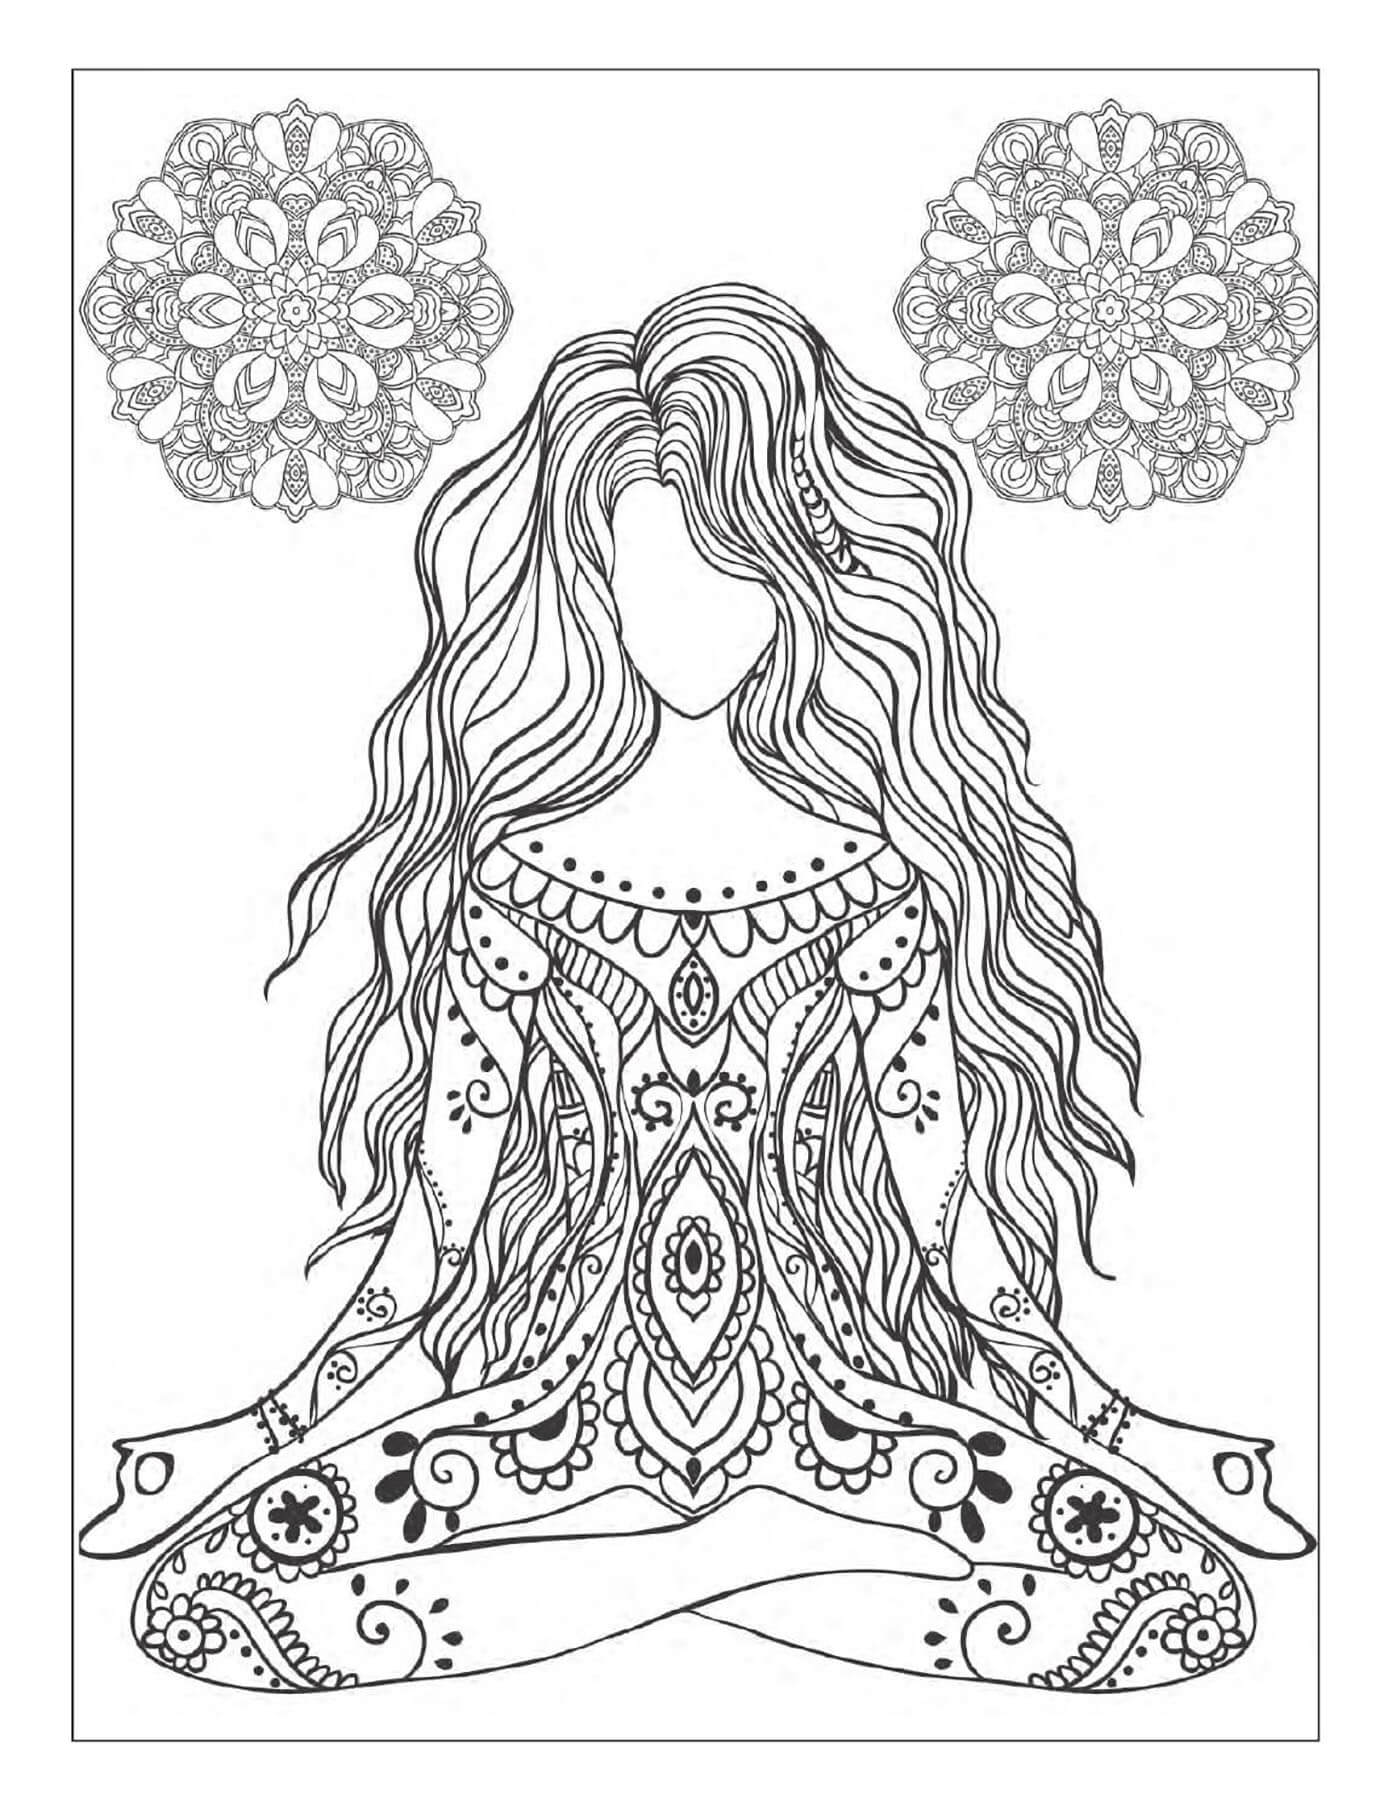 mindfulness-coloring-pages-free-printable-coloring-pages-for-kids